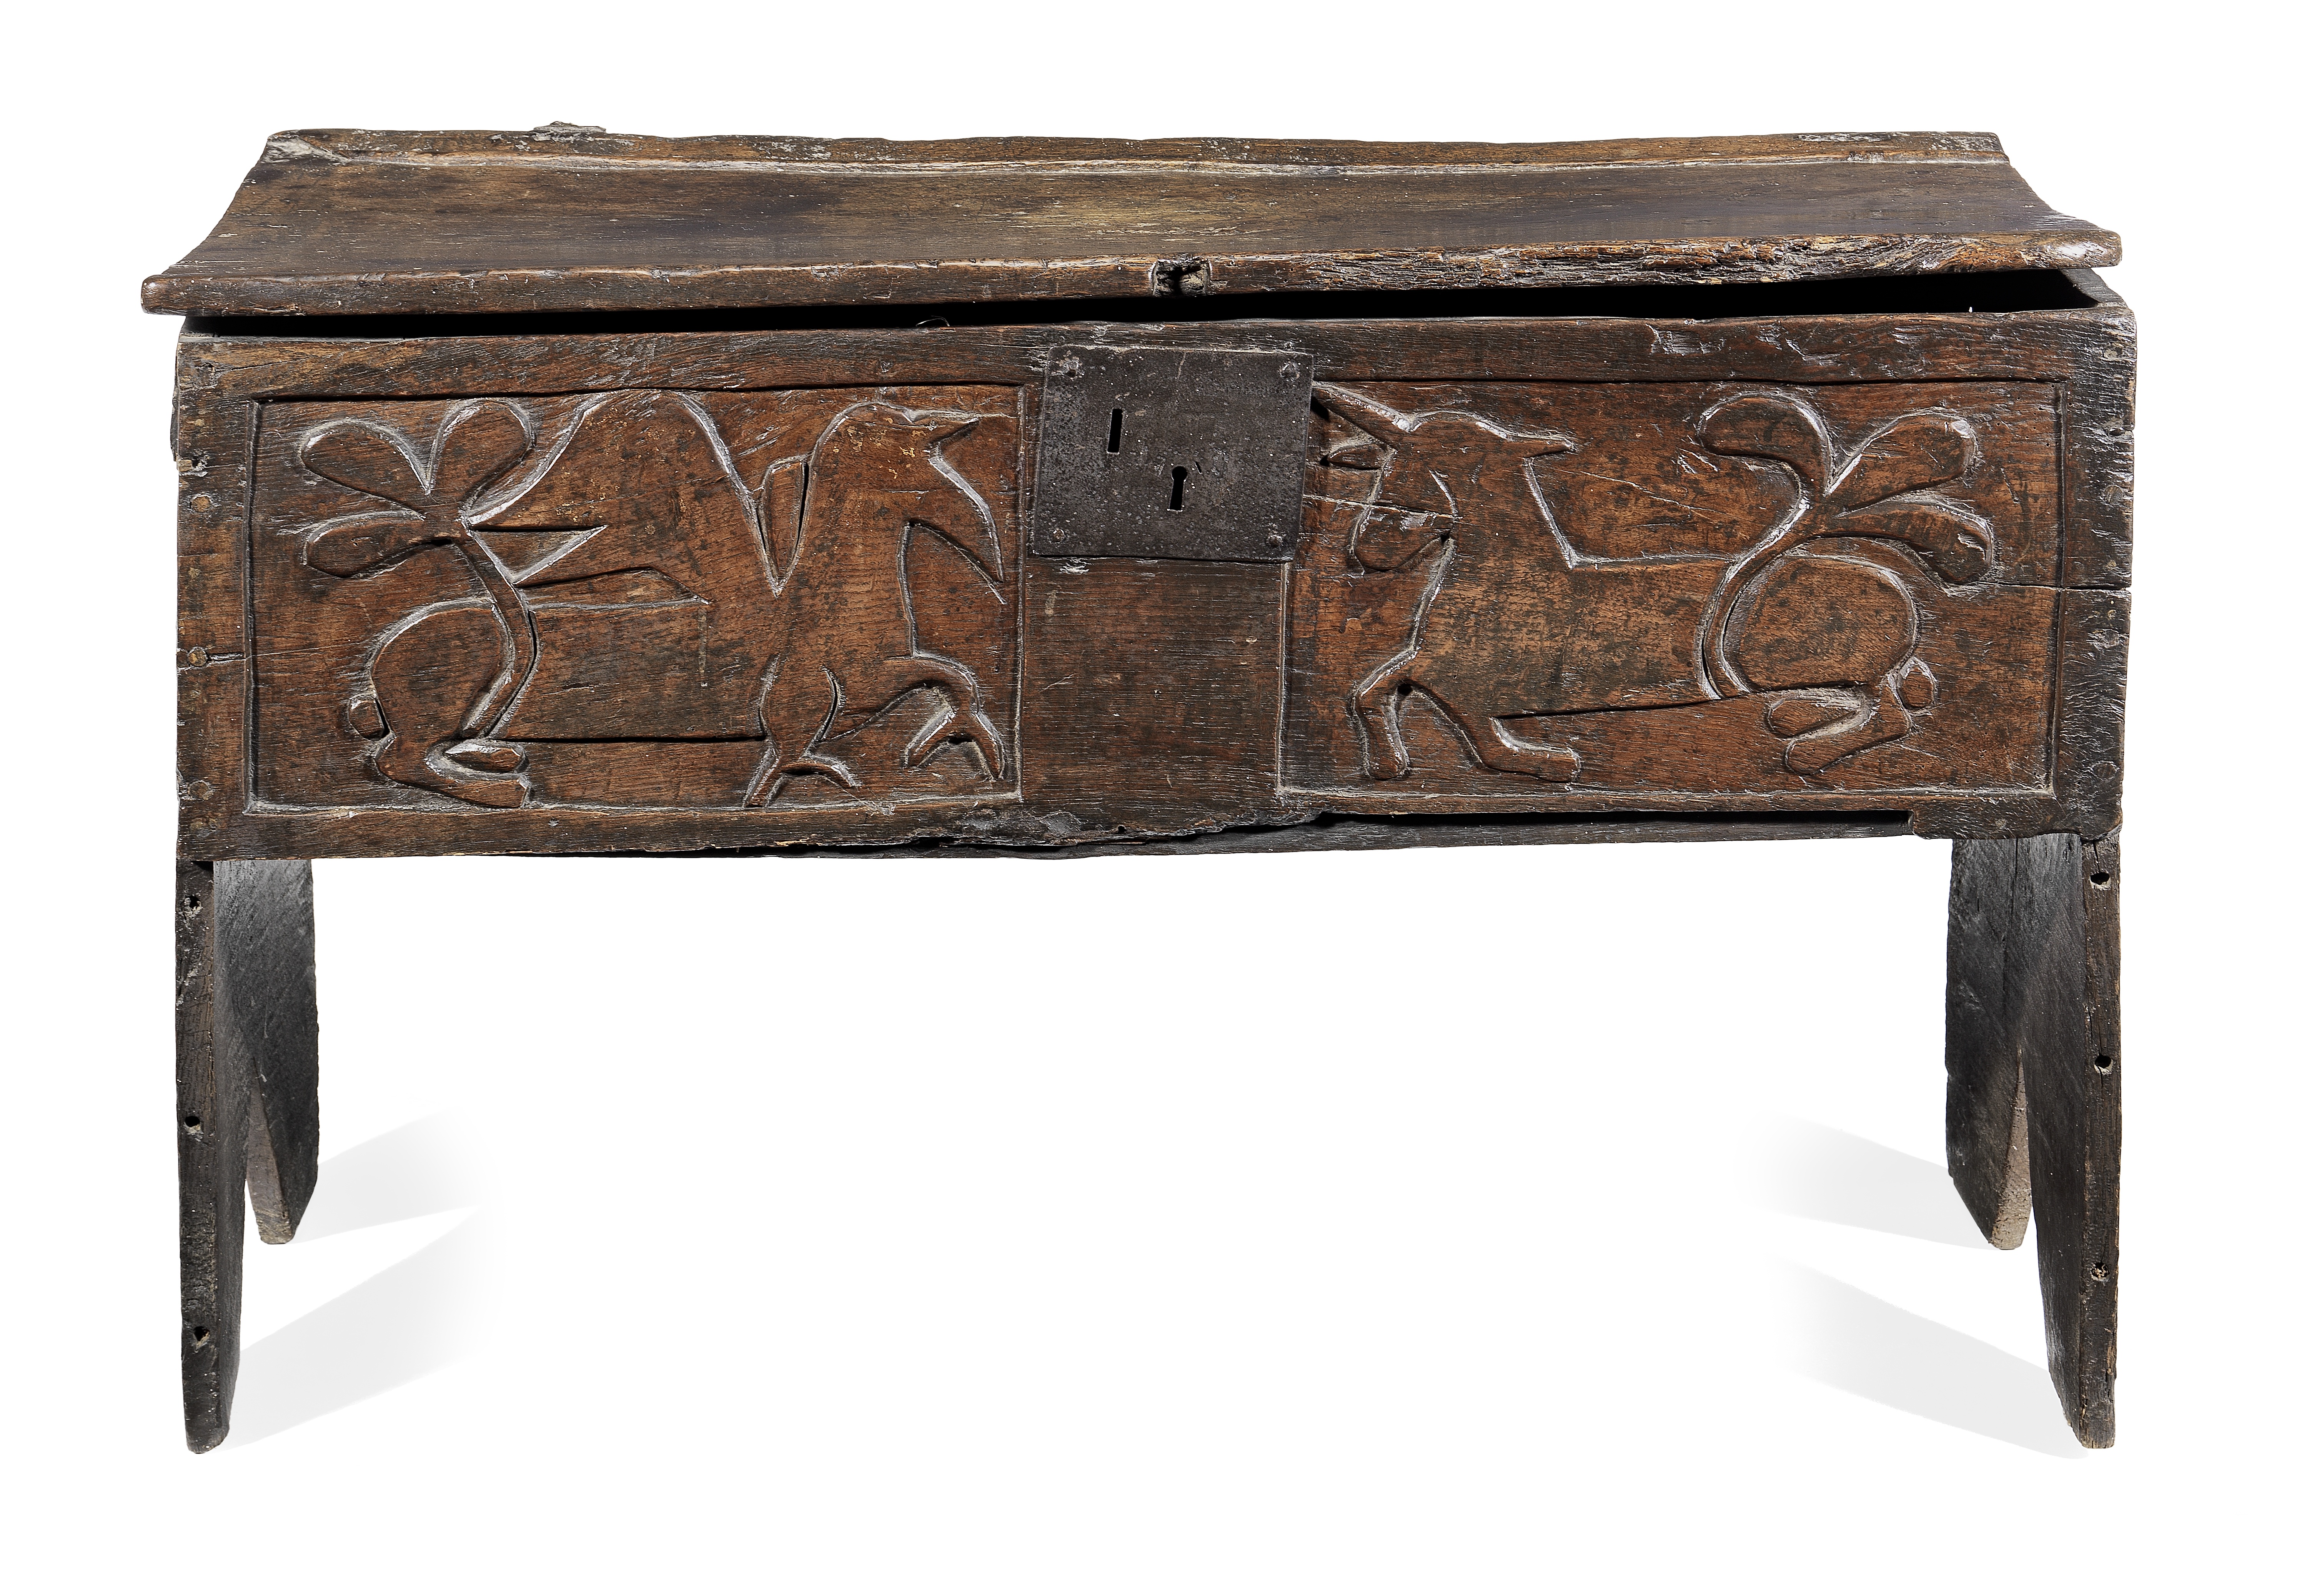 A rare Henry VII/VIII oak boarded chest, circa 1490-1530 Traces of polychrome paint